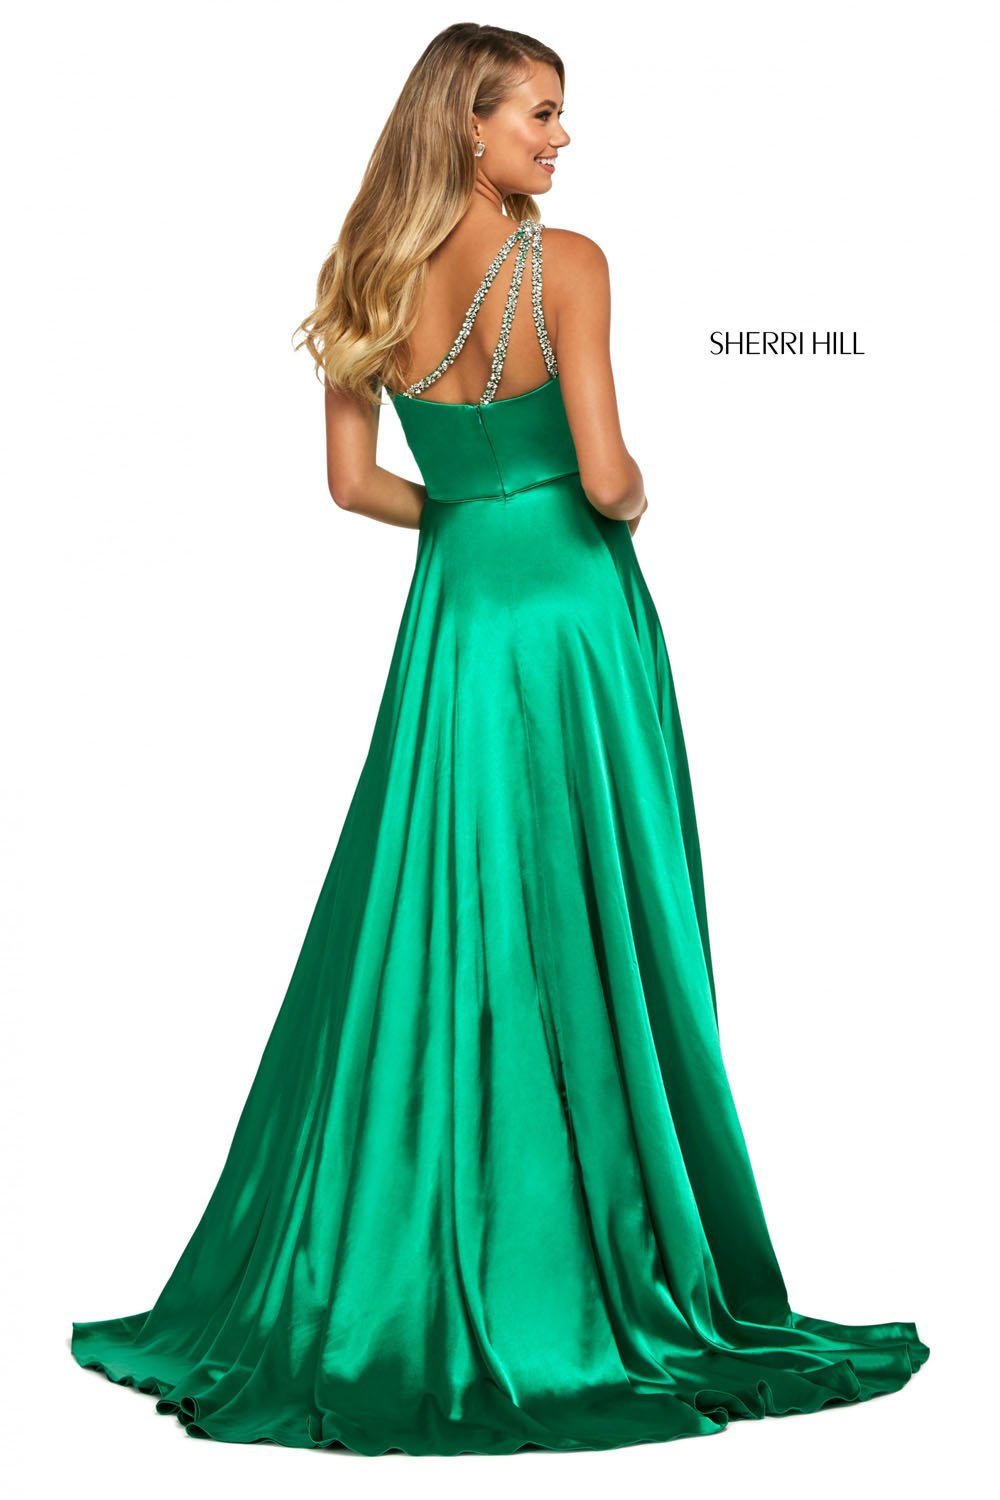 Sherri Hill 53295 dress images in these colors: Red, Turquoise, Wine, Navy, Royal, Emerald, Rose, Black, Gold, Ivory, Lilac, Yellow, Light Blue, Mocha.